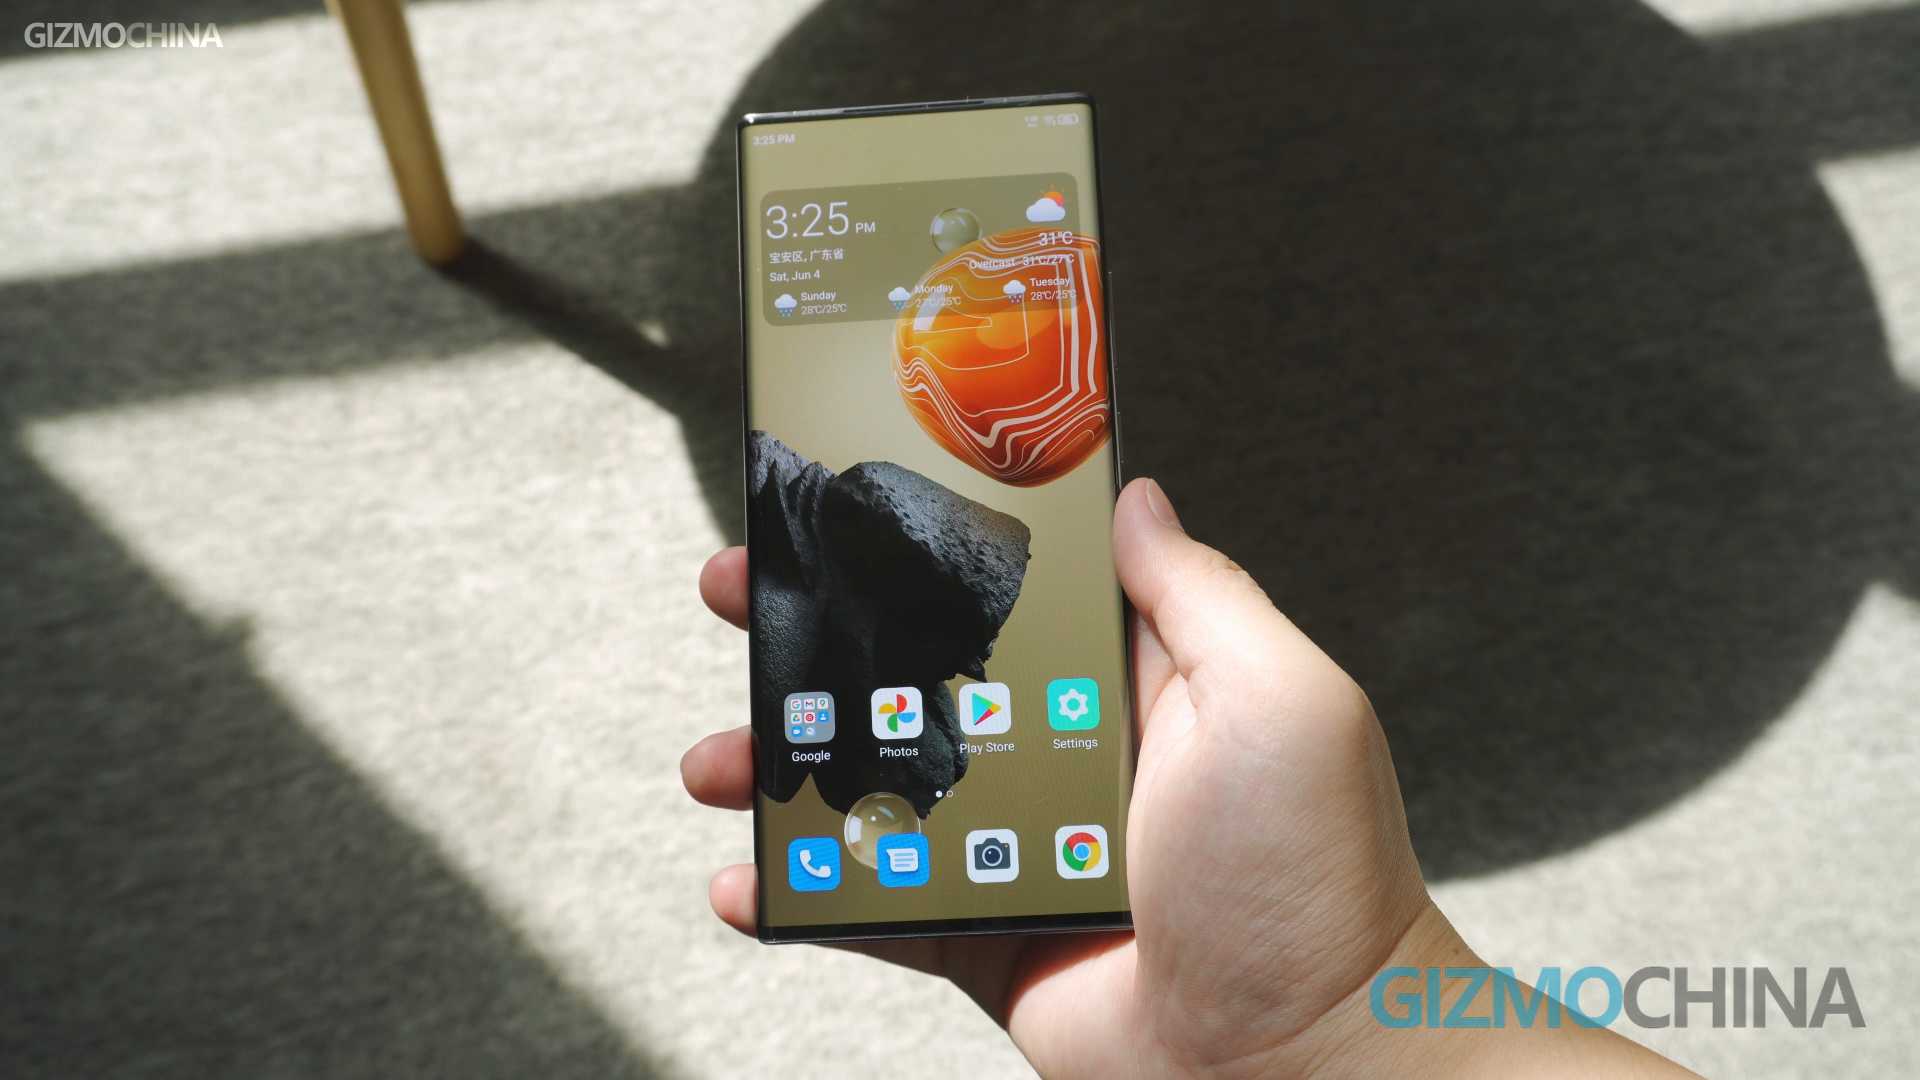 ZTE Axon 40 Ultra: Flagship smartphone arrives with 3rd generation  under-panel camera, a boxy design and triple 64 MP camera set up -   News